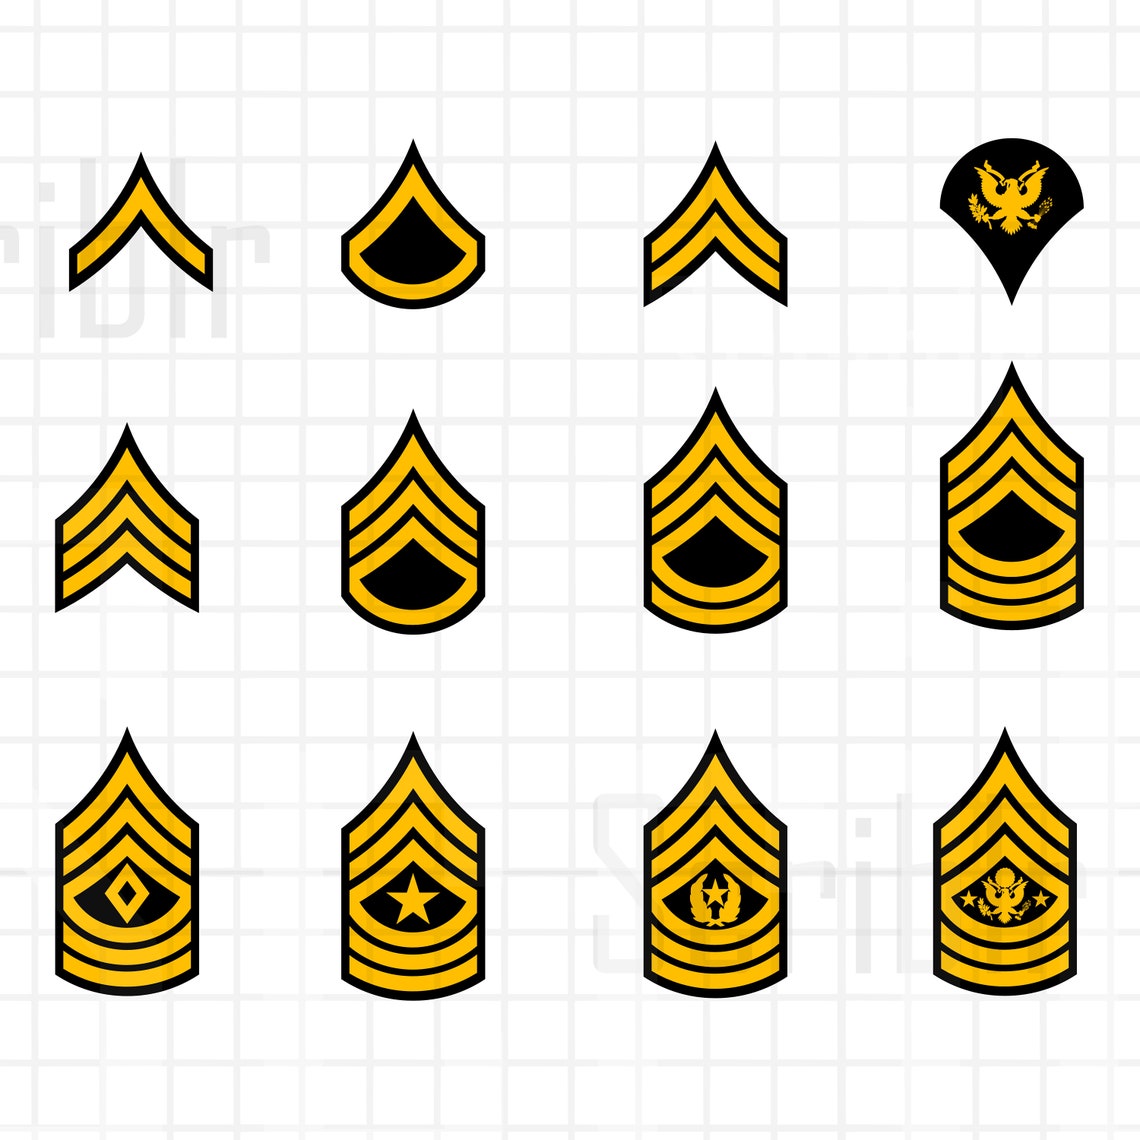 army enlisted ranks